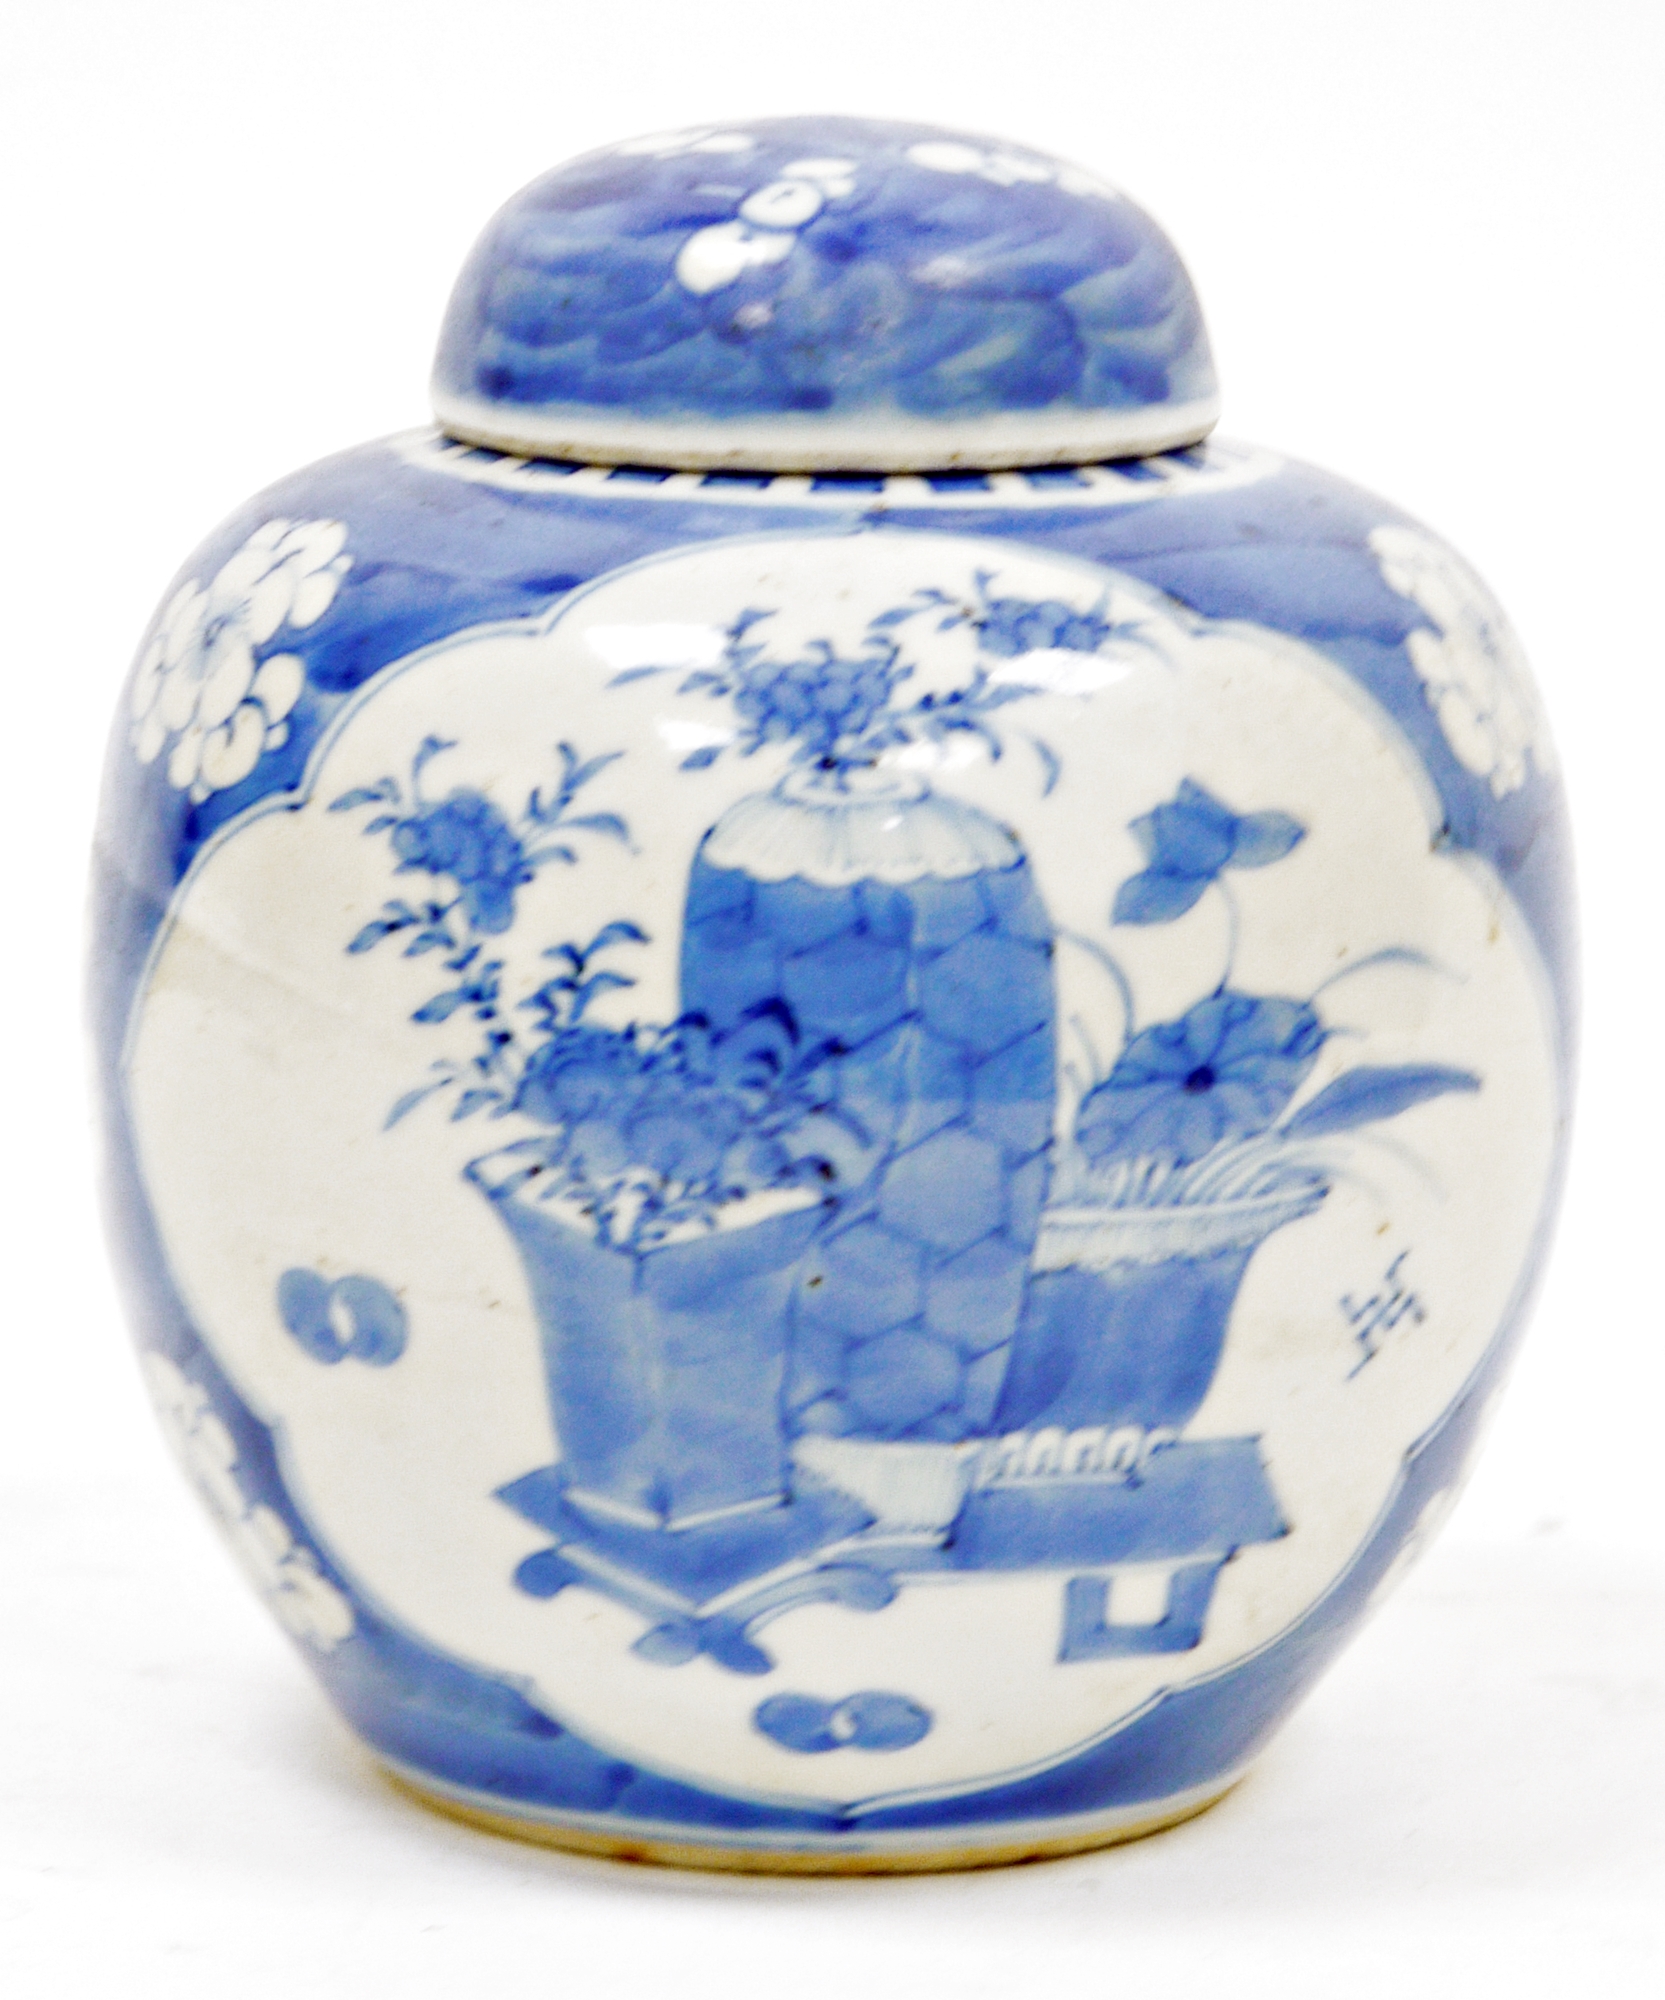 Chinese porcelain ginger jar and cover, 19th century, underglaze blue four-character mark, painted